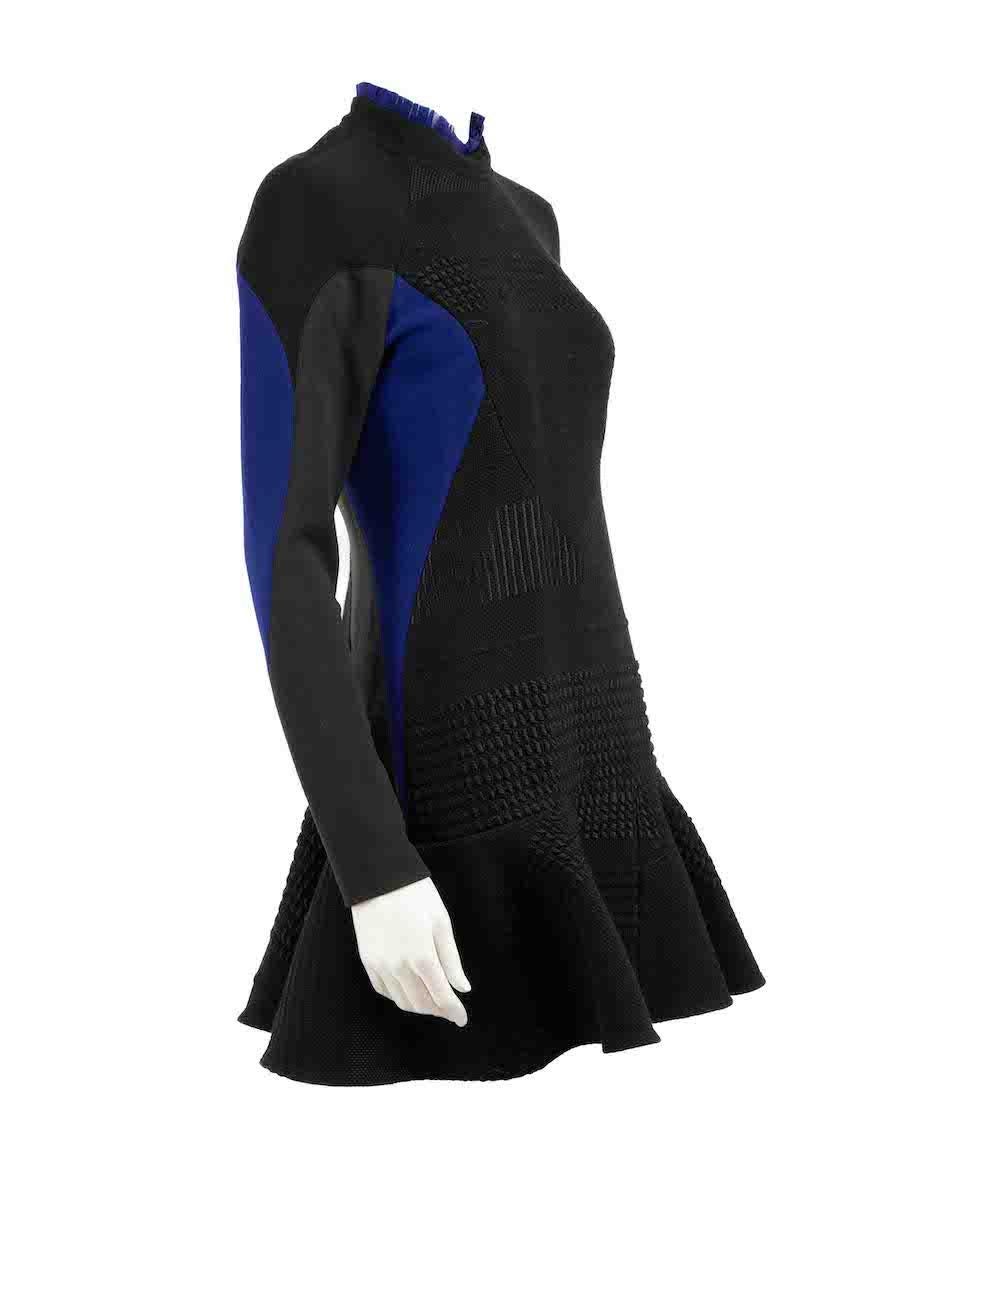 CONDITION is Good. Minor wear to dress is evident. Light pulled threads to quilted sections on base of dress on this used Stella McCartney designer resale item.
 
 
 
 Details
 
 
 Black
 
 Cotton
 
 Dress
 
 Mini
 
 Blue panelled detail
 
 Long